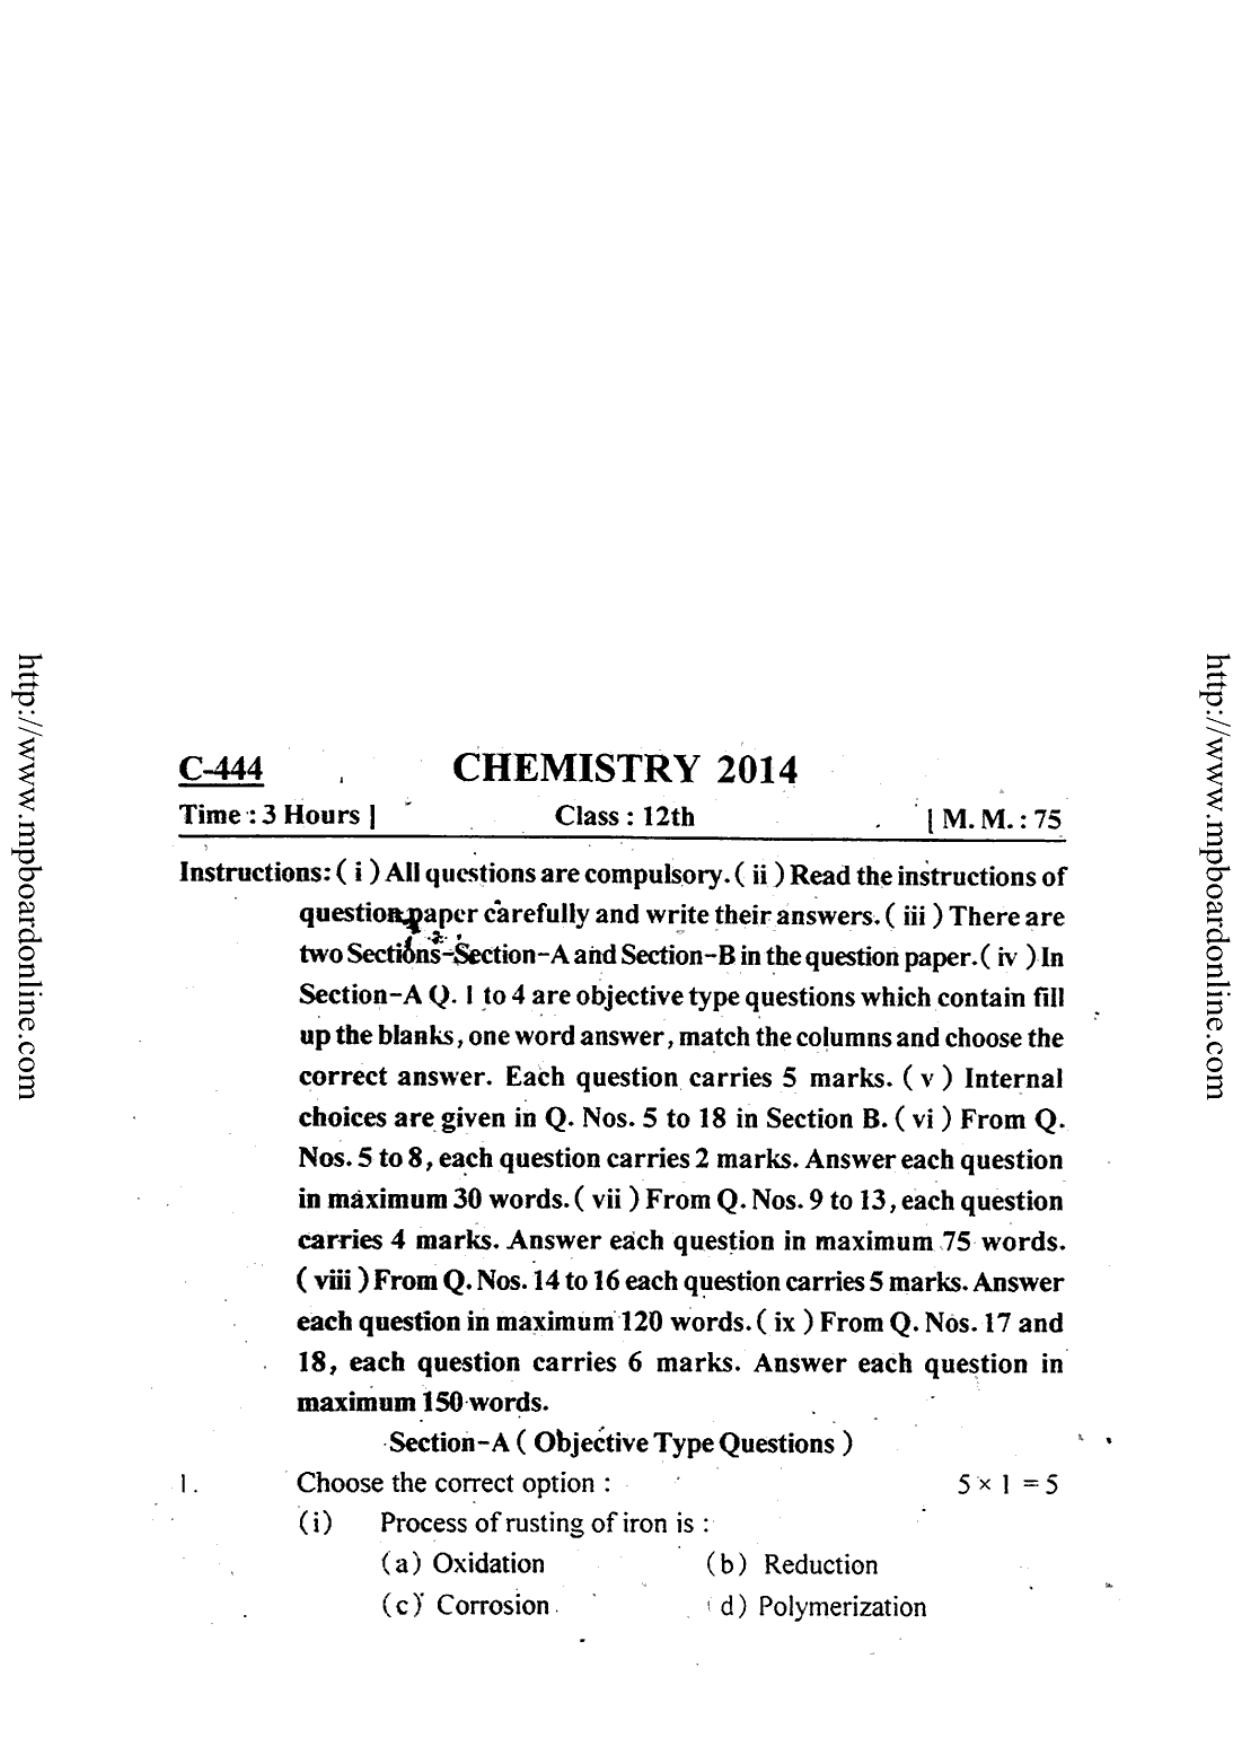 MP Board Class 12 Chemistry (English Medium) 2014 Question Paper - Page 1